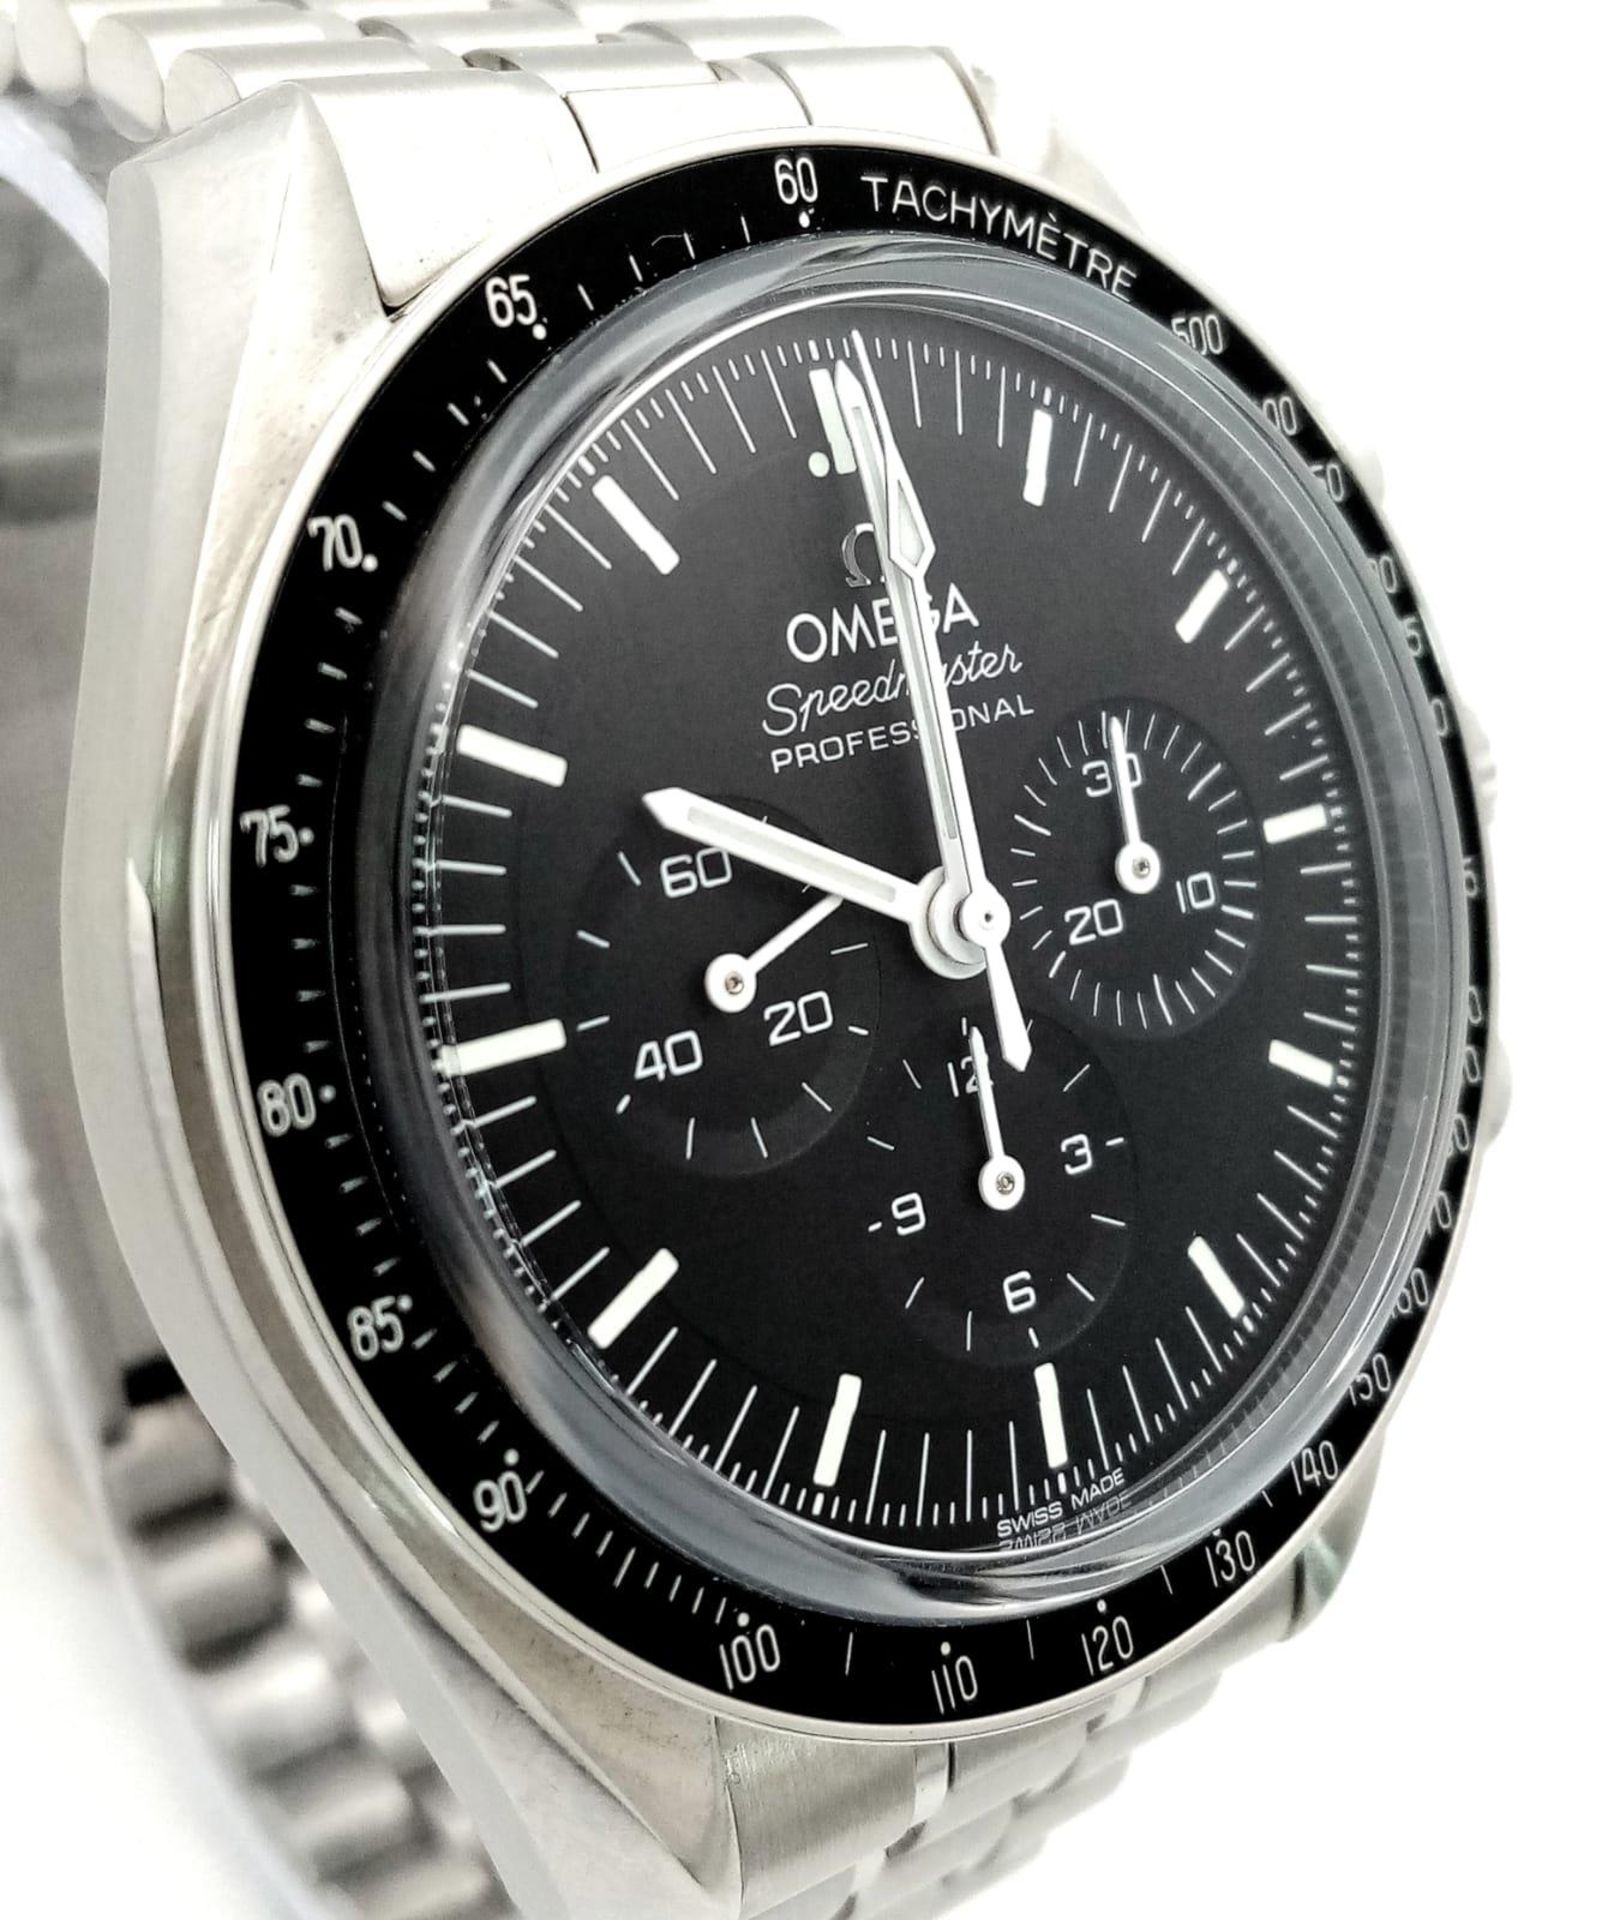 An Omega Speedmaster Moonwatch Chronograph Gents Watch. Stainless steel bracelet and case - 42mm. - Image 5 of 19